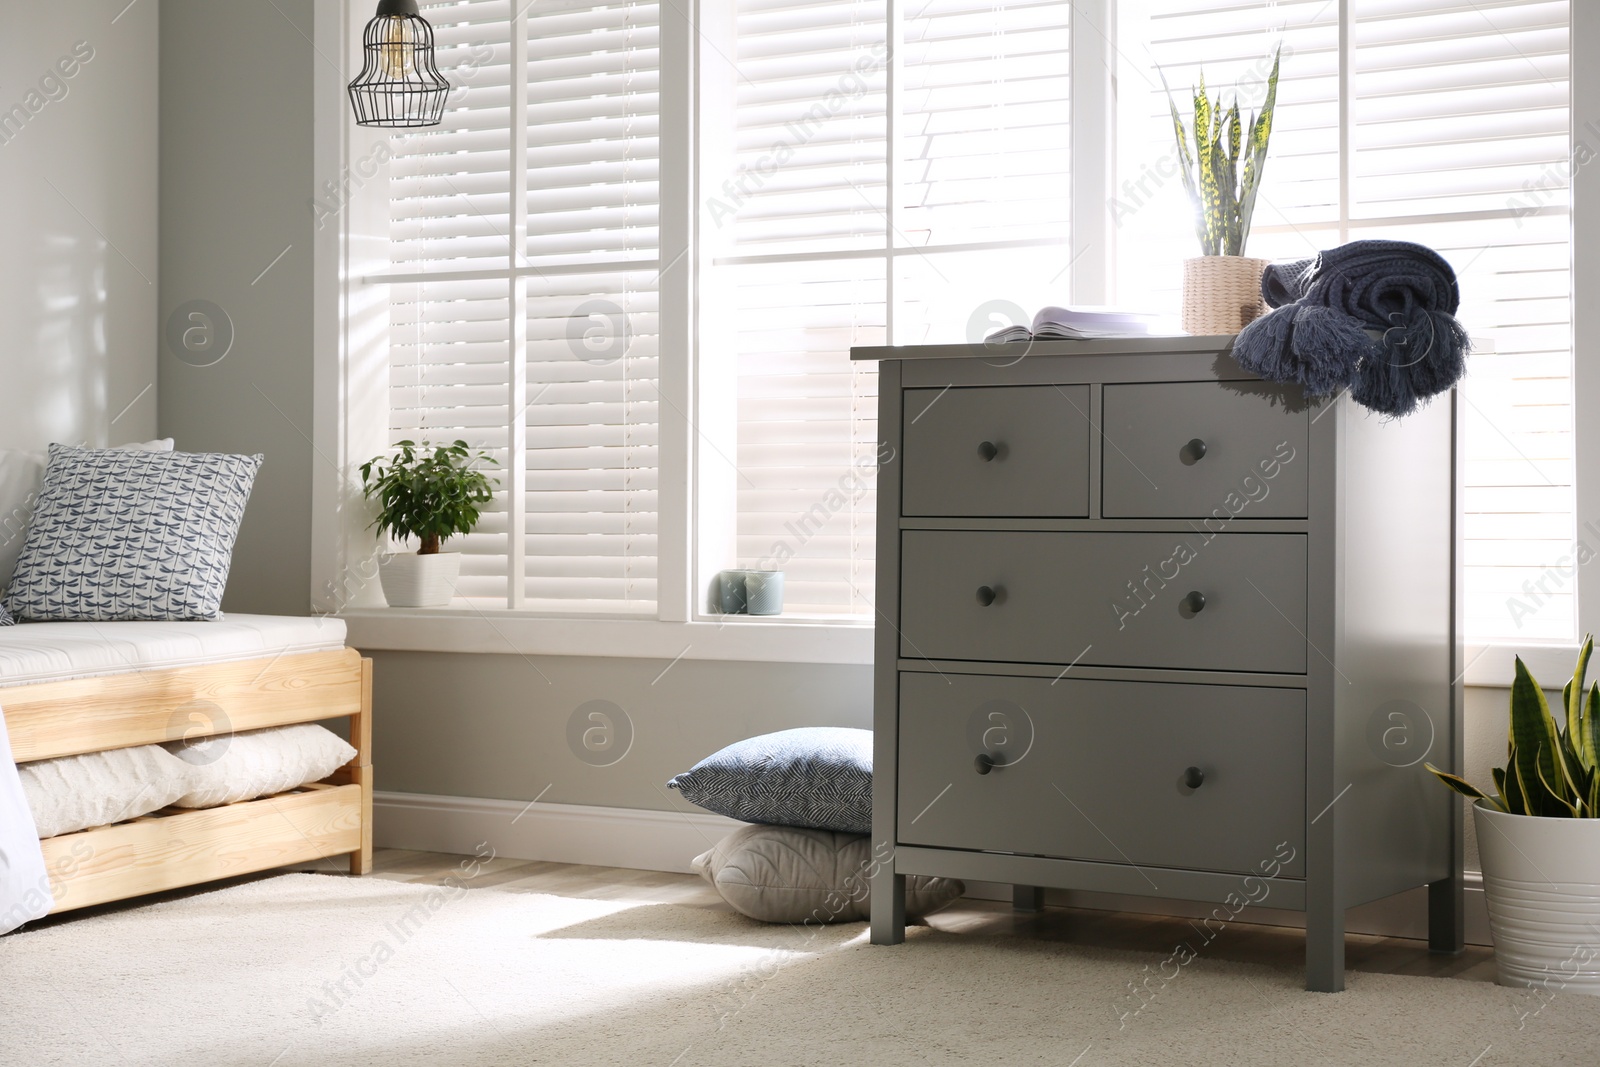 Photo of Grey chest of drawers near window in stylish bedroom interior